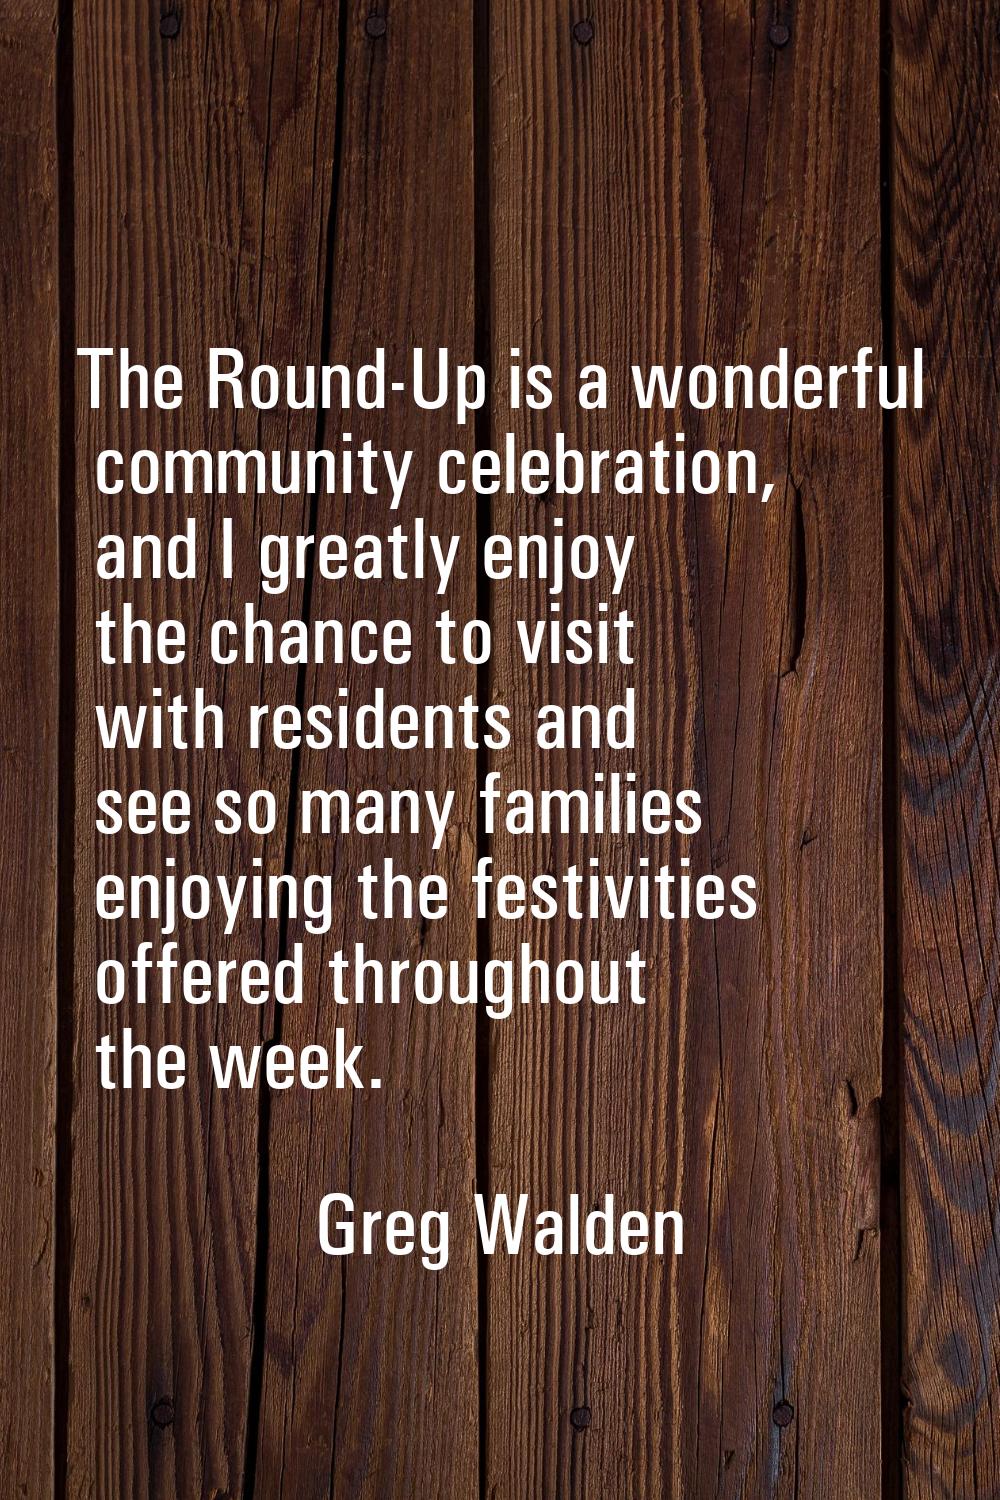 The Round-Up is a wonderful community celebration, and I greatly enjoy the chance to visit with res